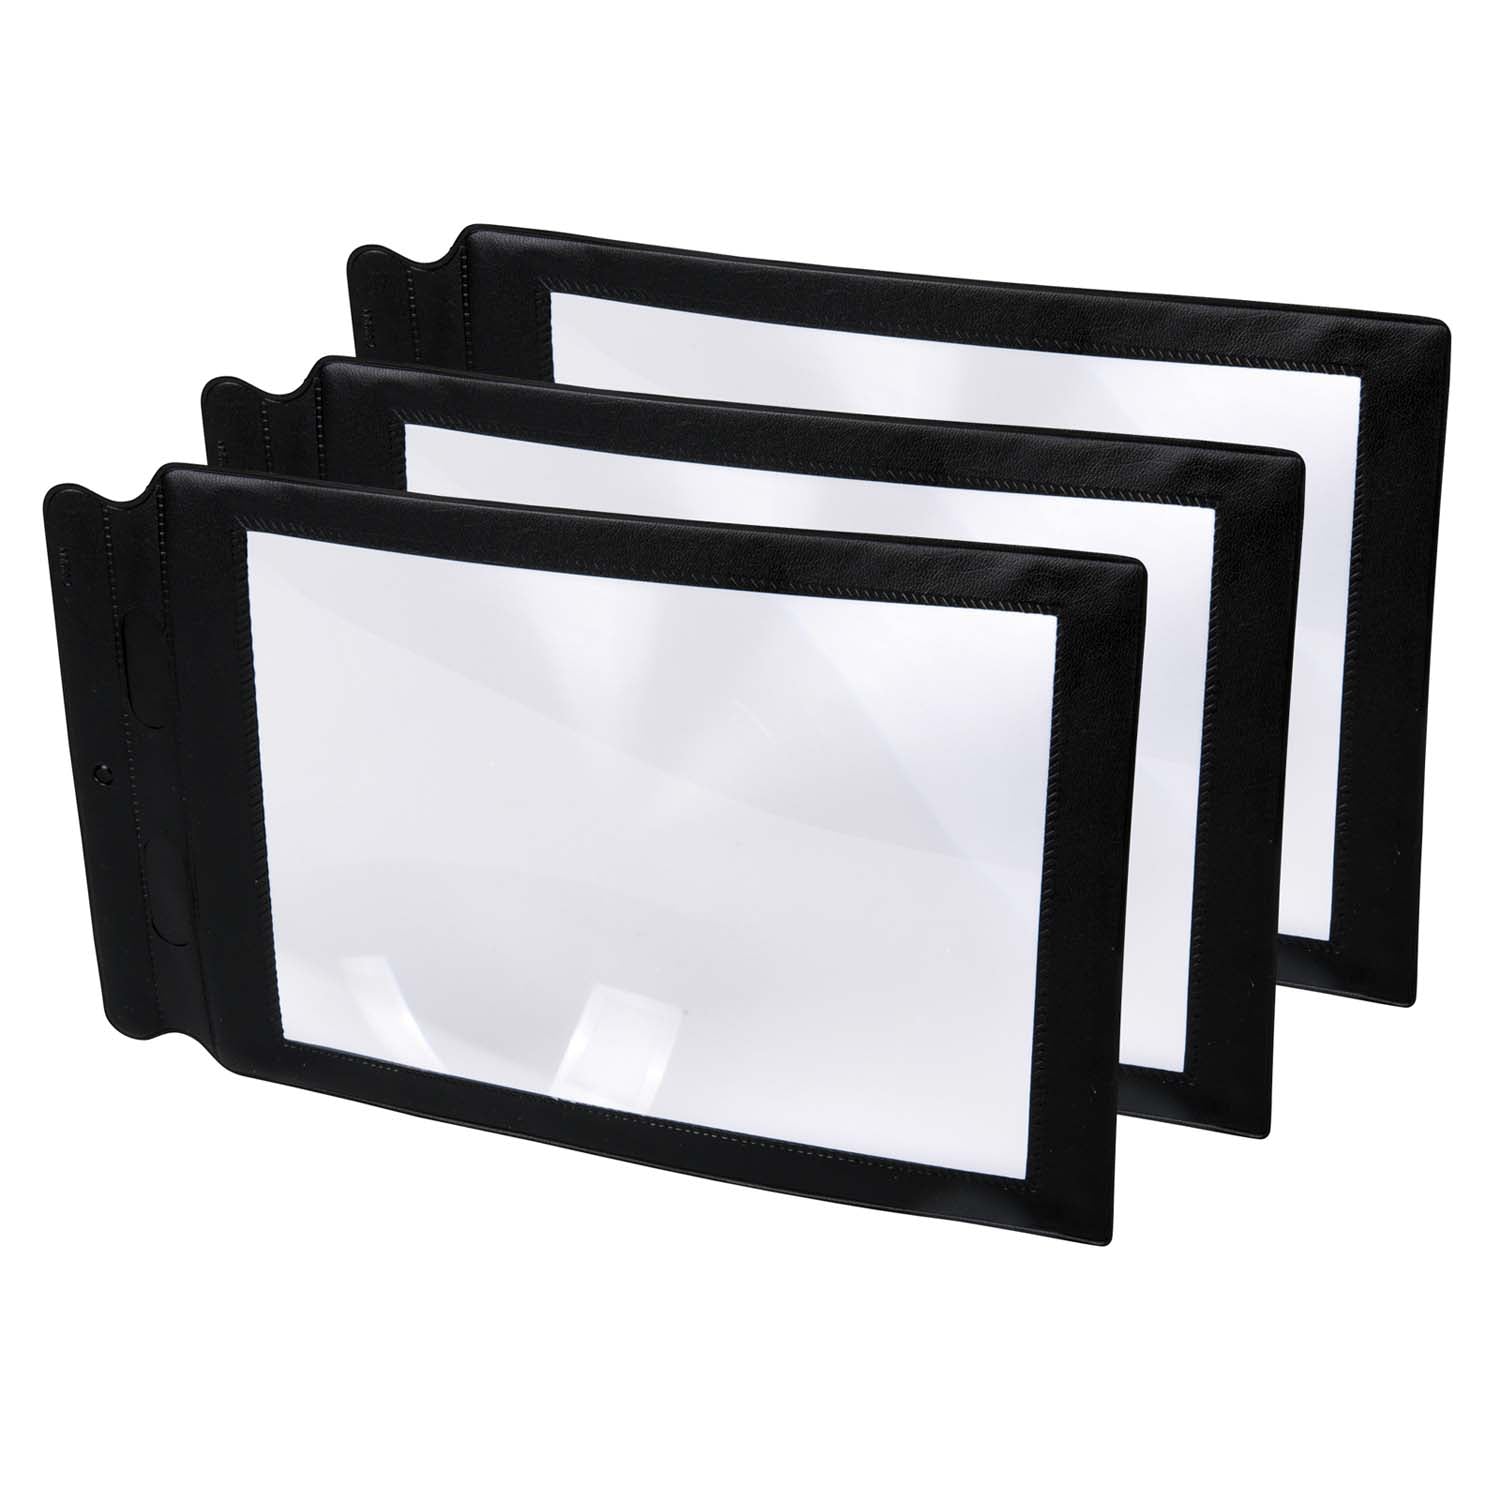 Large Sheet Magnifier, 8.7" x 5.5", Pack of 3